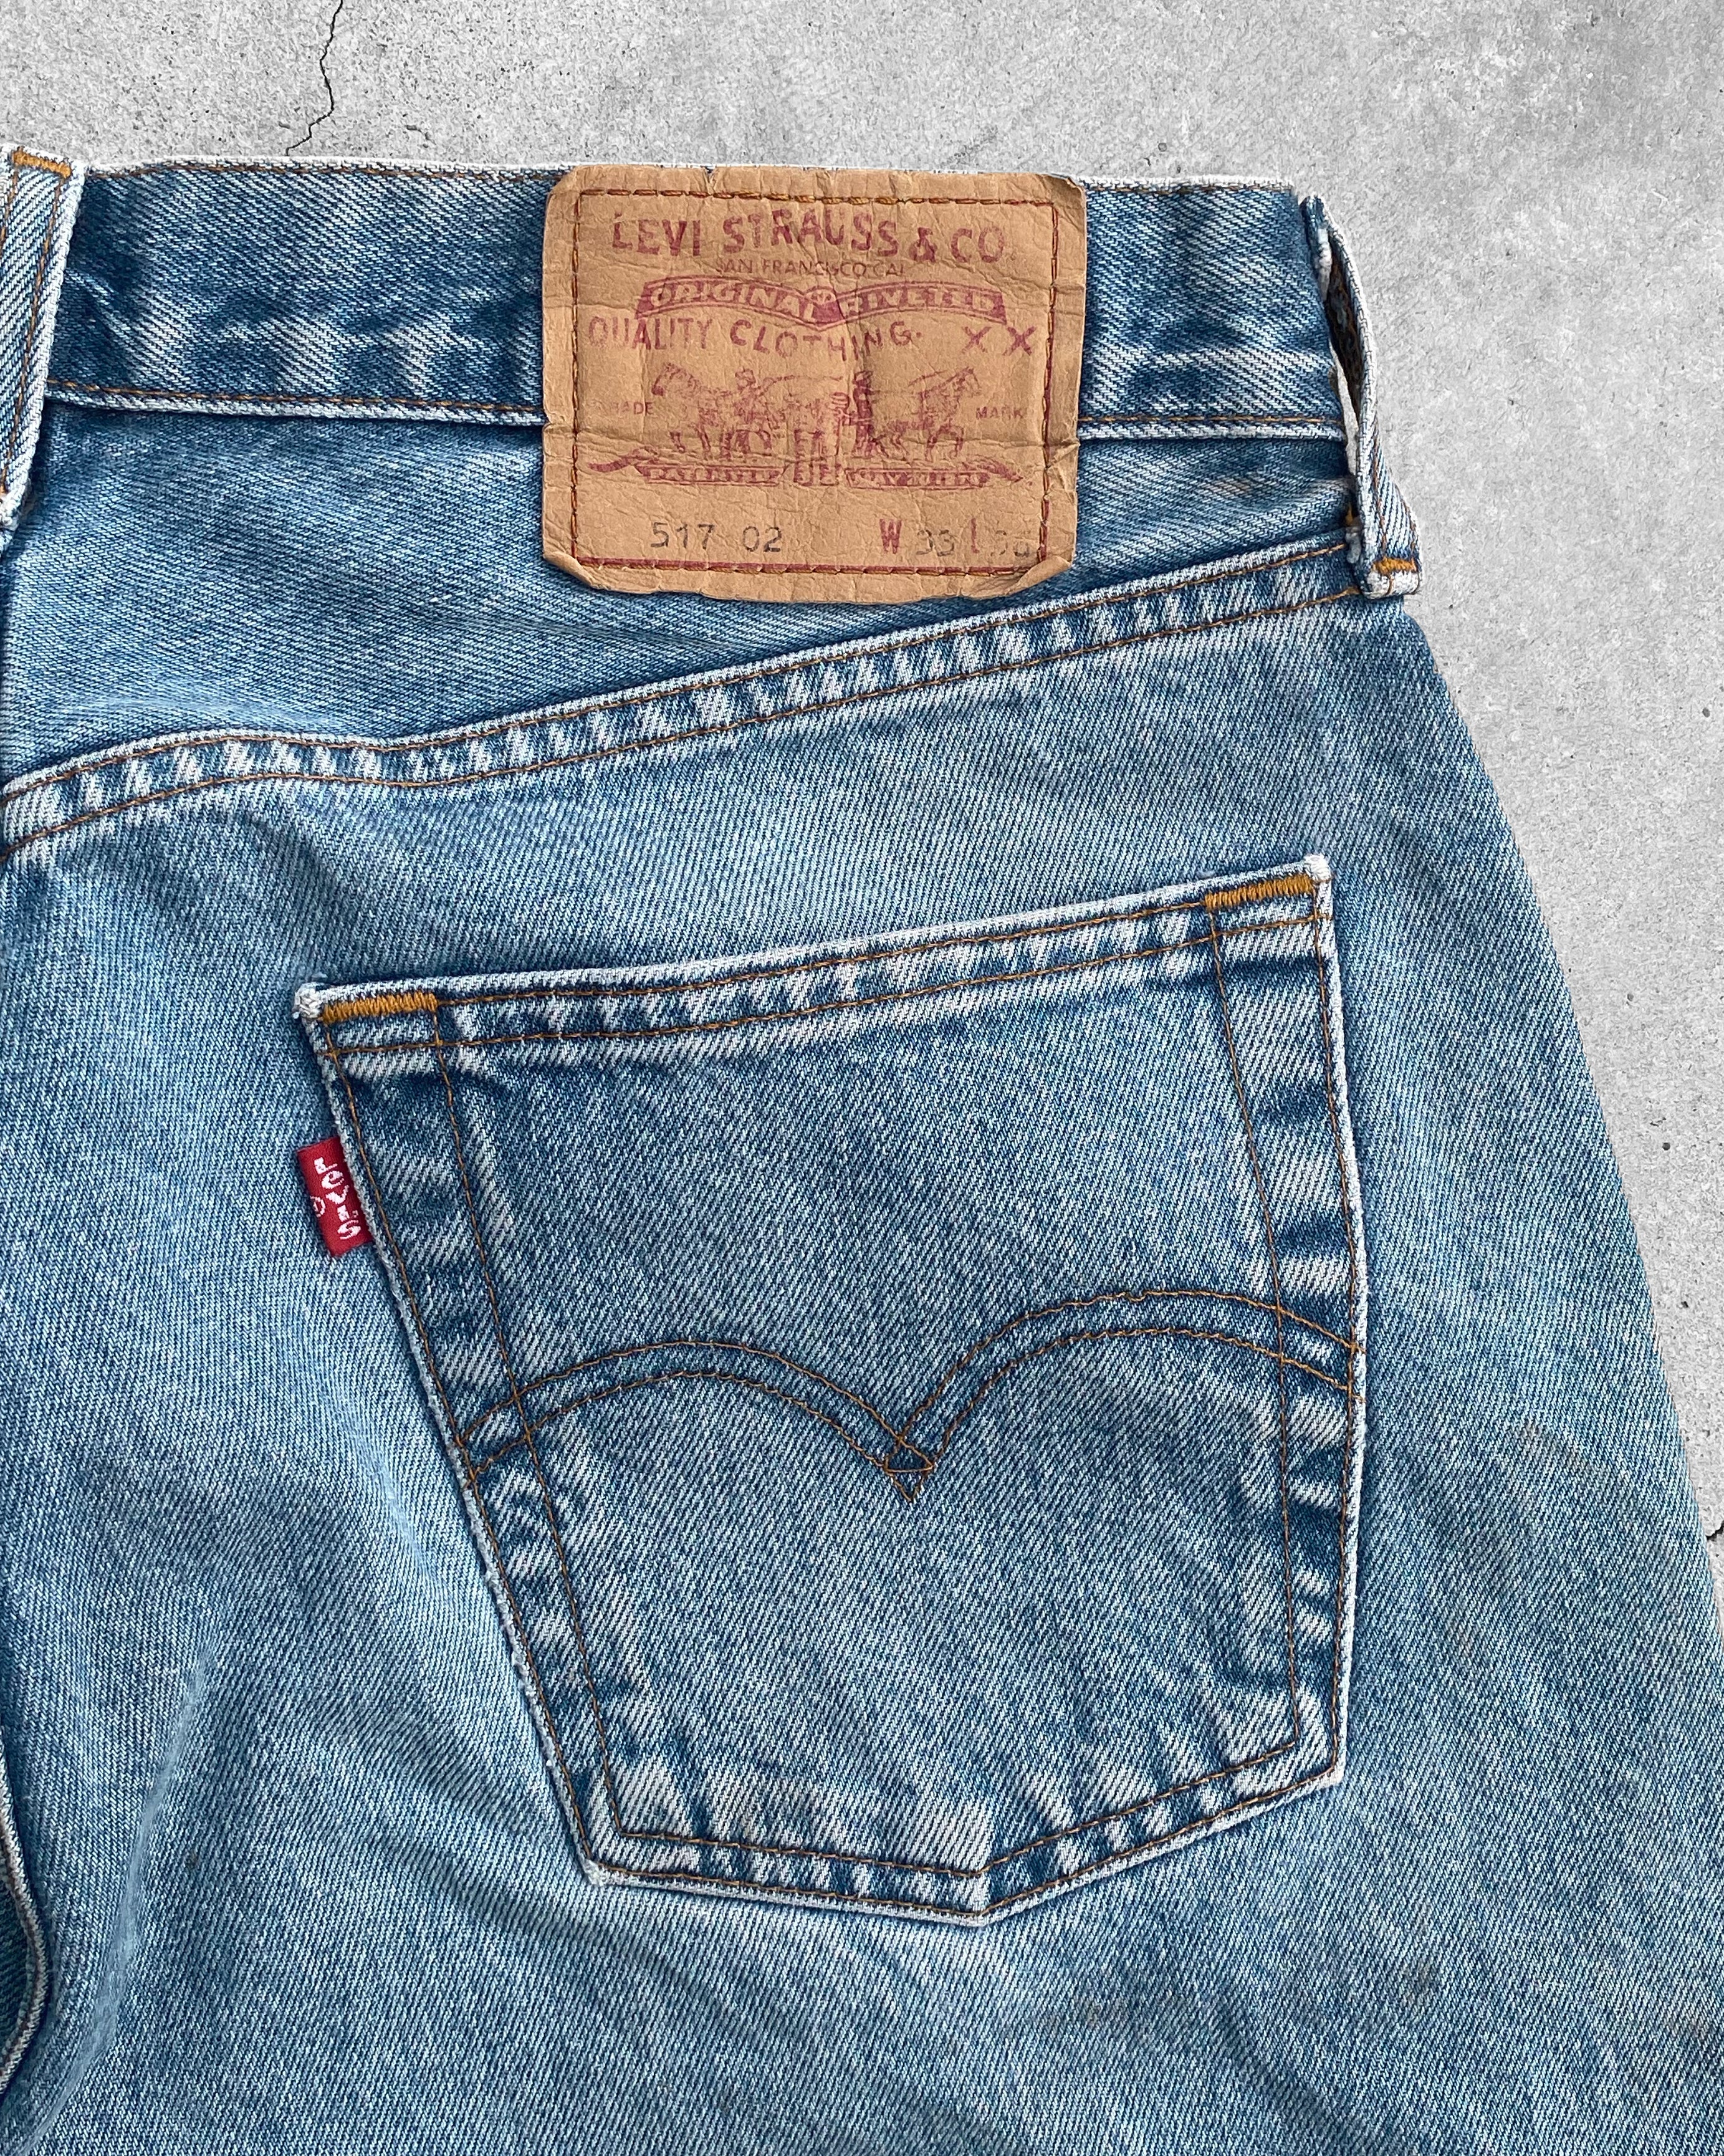 Levis 517 02 Dirty Blue RAGS